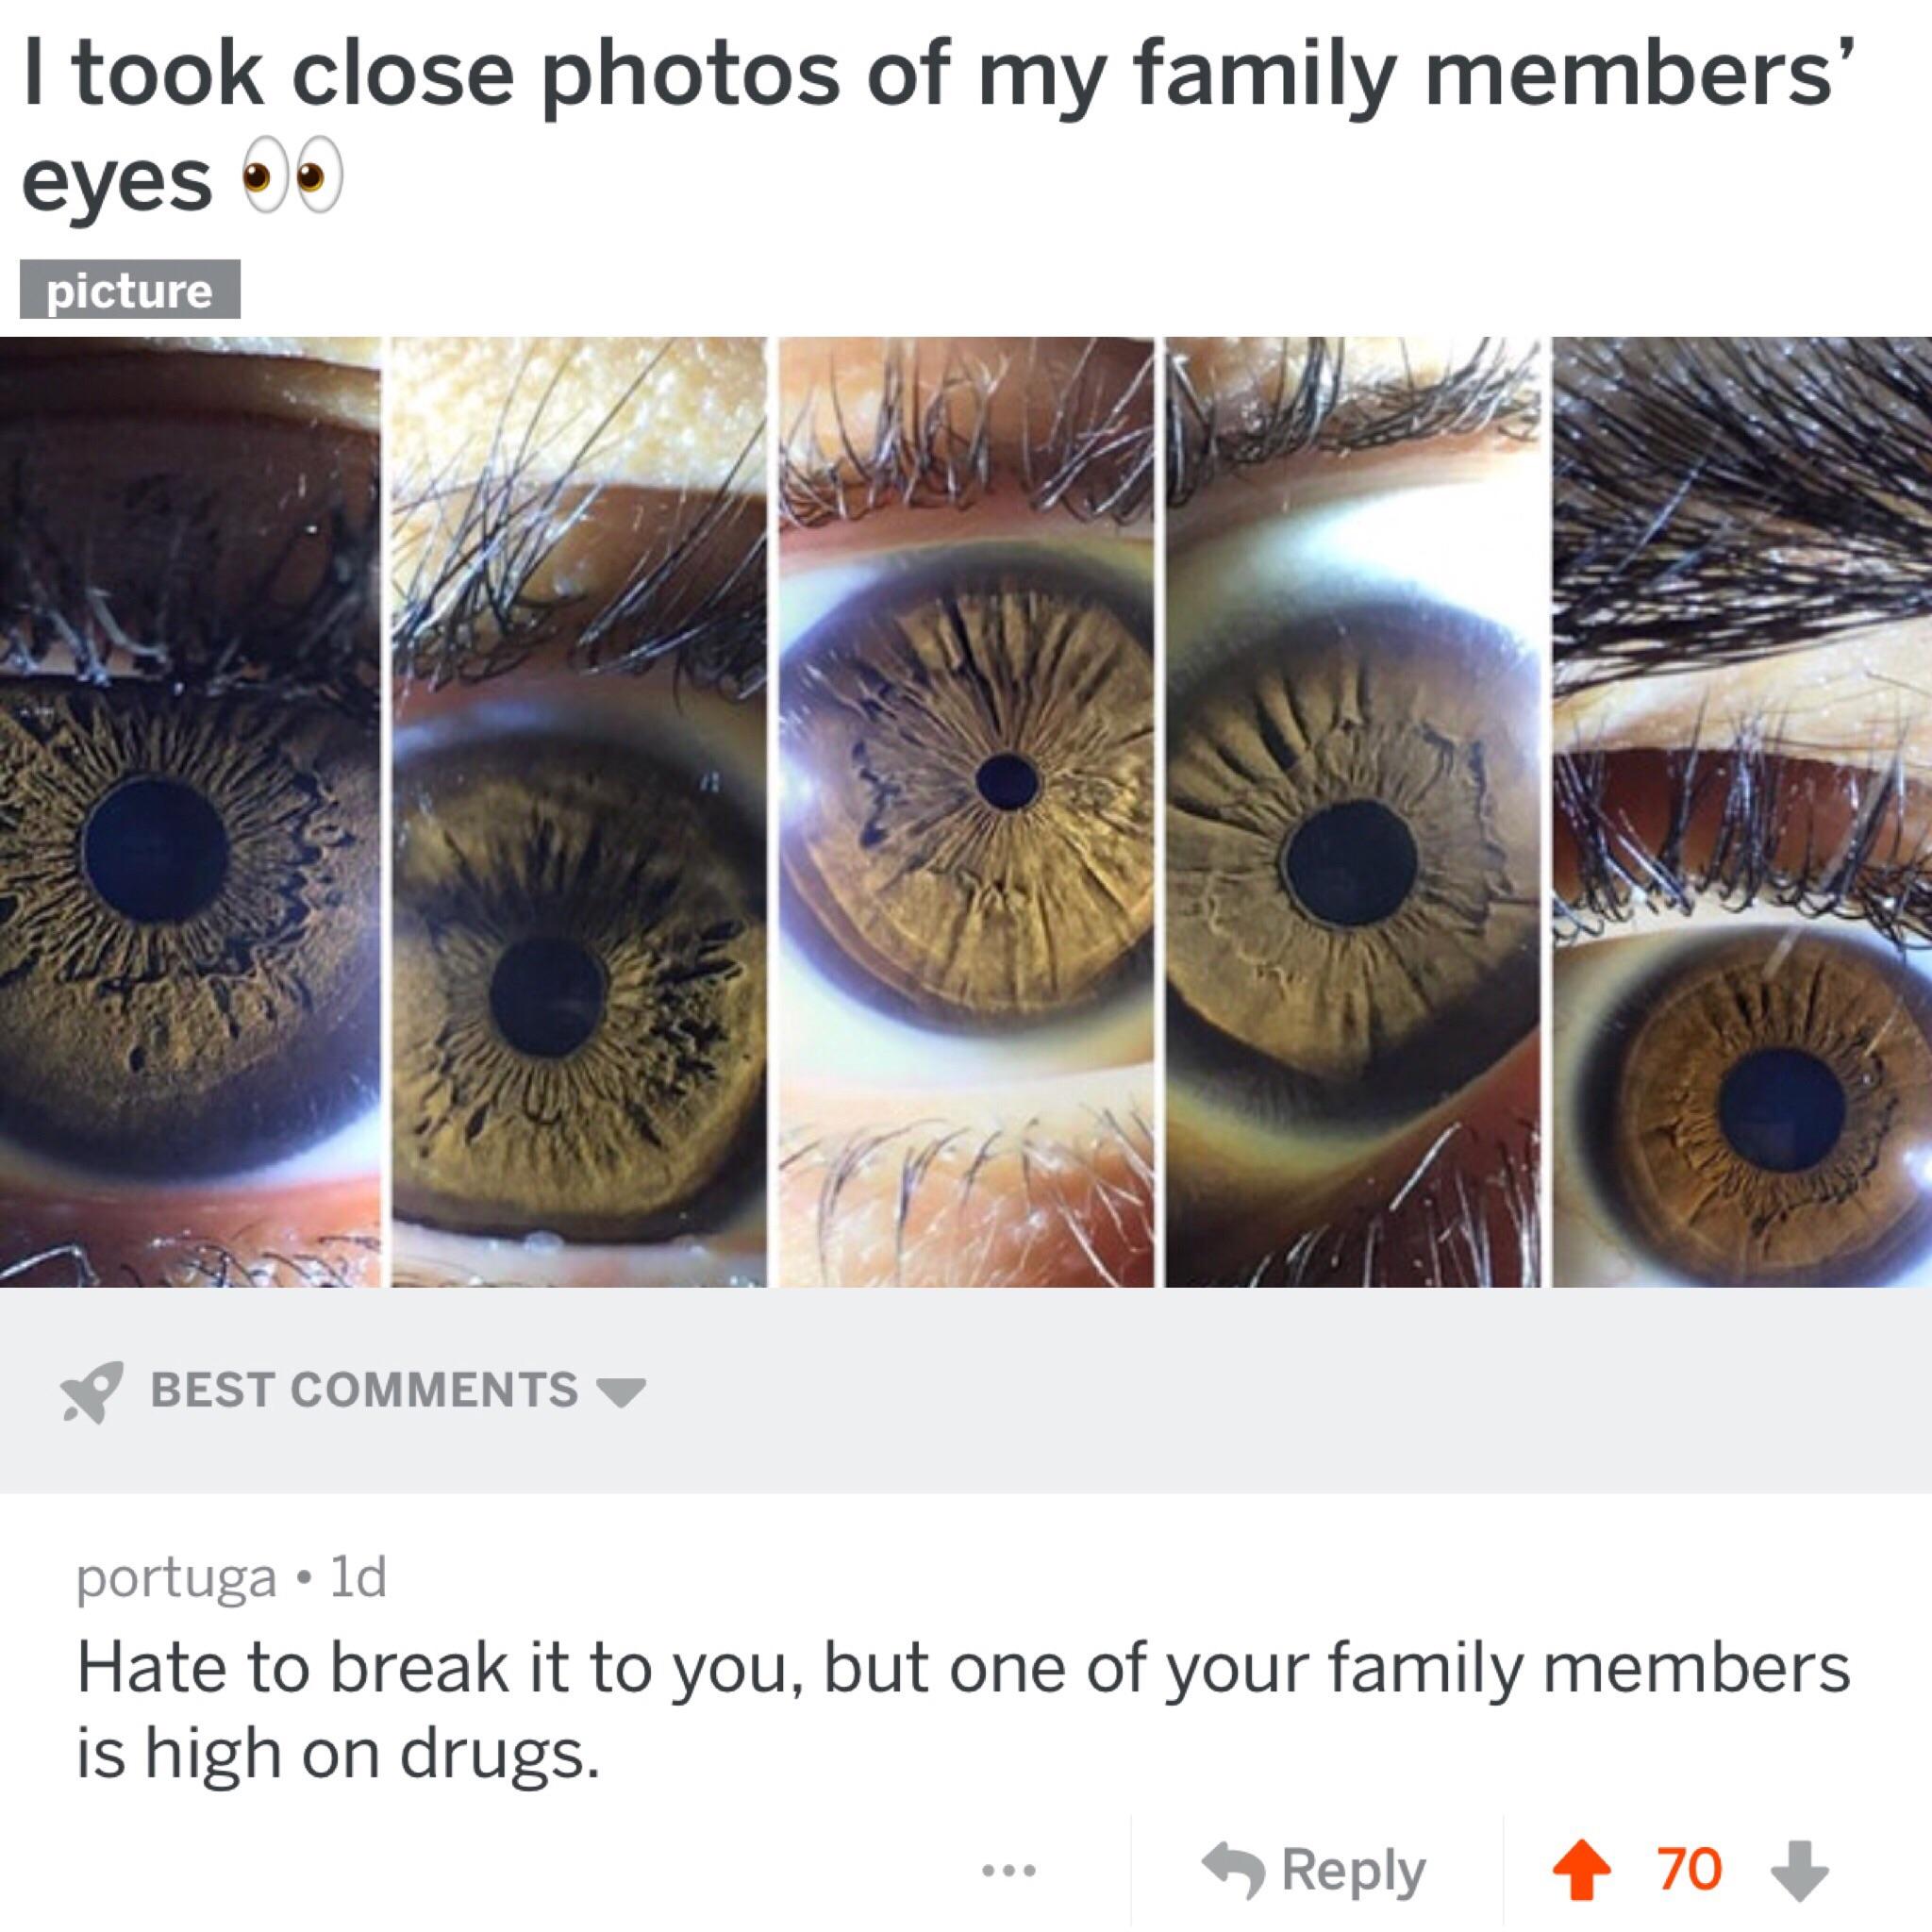 really funny pictures - iris - I took close photos of my family members' eyes picture Best portuga ld Hate to break it to you, but one of your family members is high on drugs. ... 470